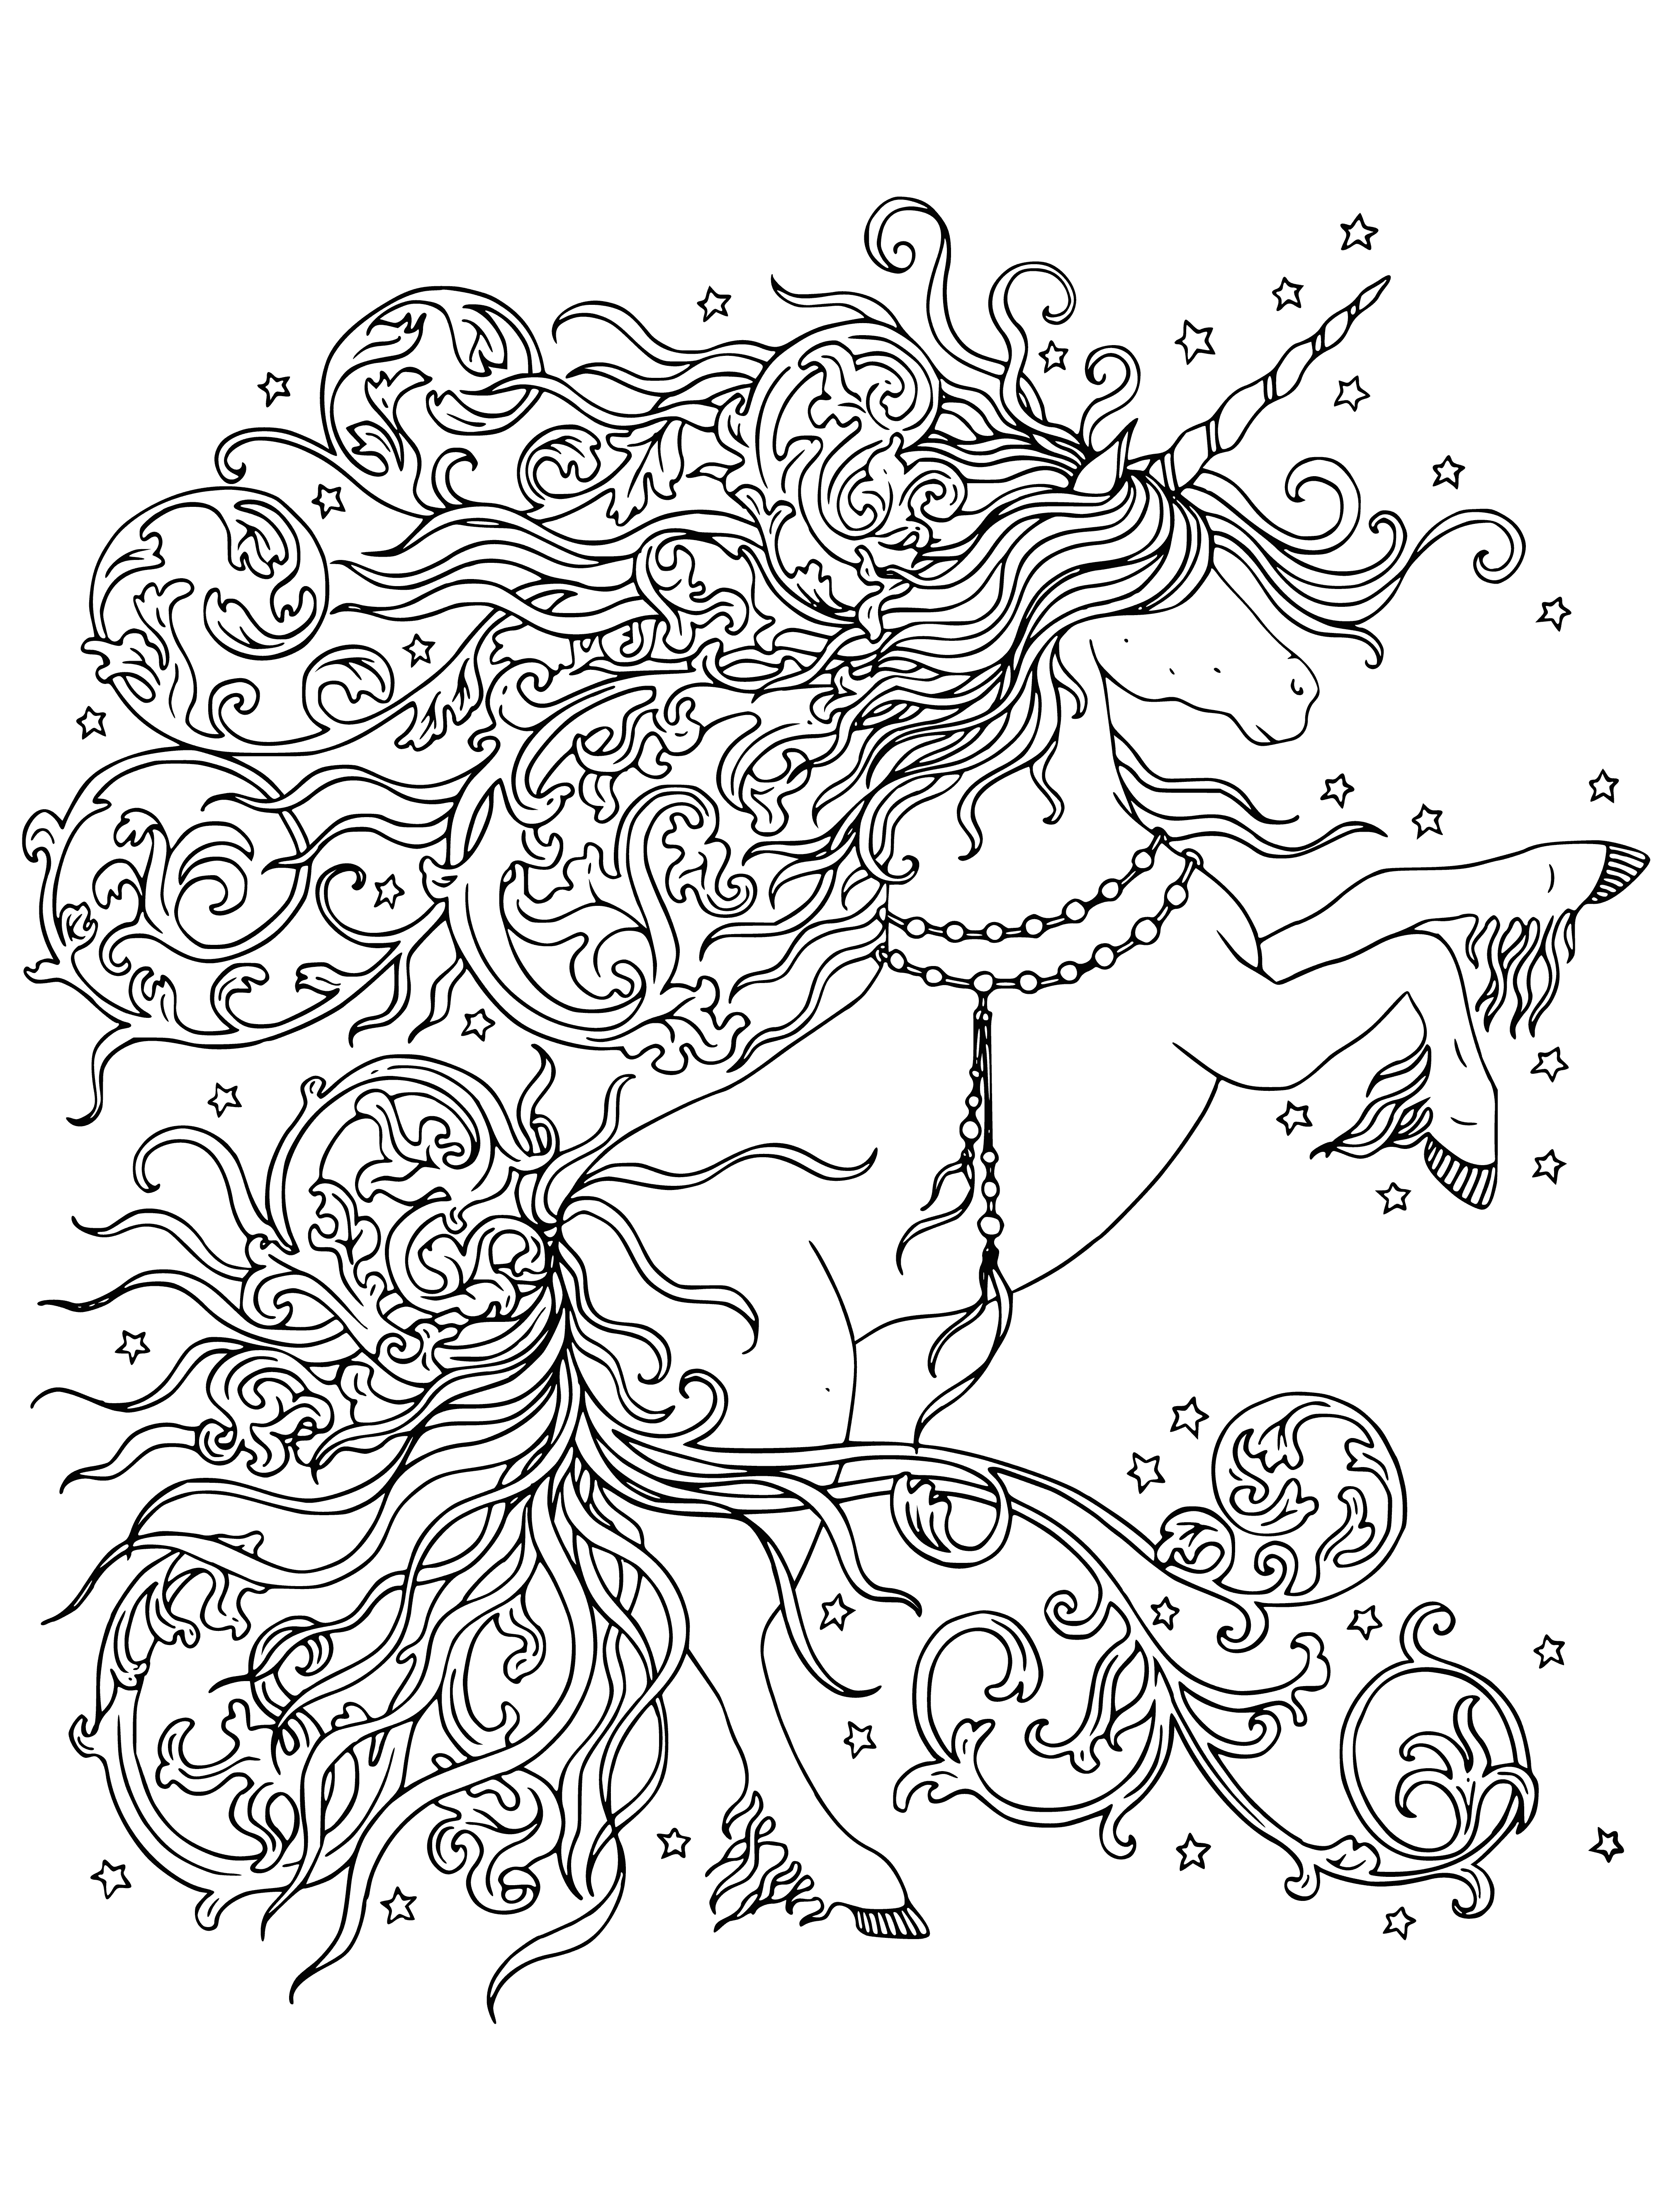 coloring page: -> Magical unicorn rears gracefully before a rainbow, mane & tail blowing, glittering horn & hooves, surrounded by stars.